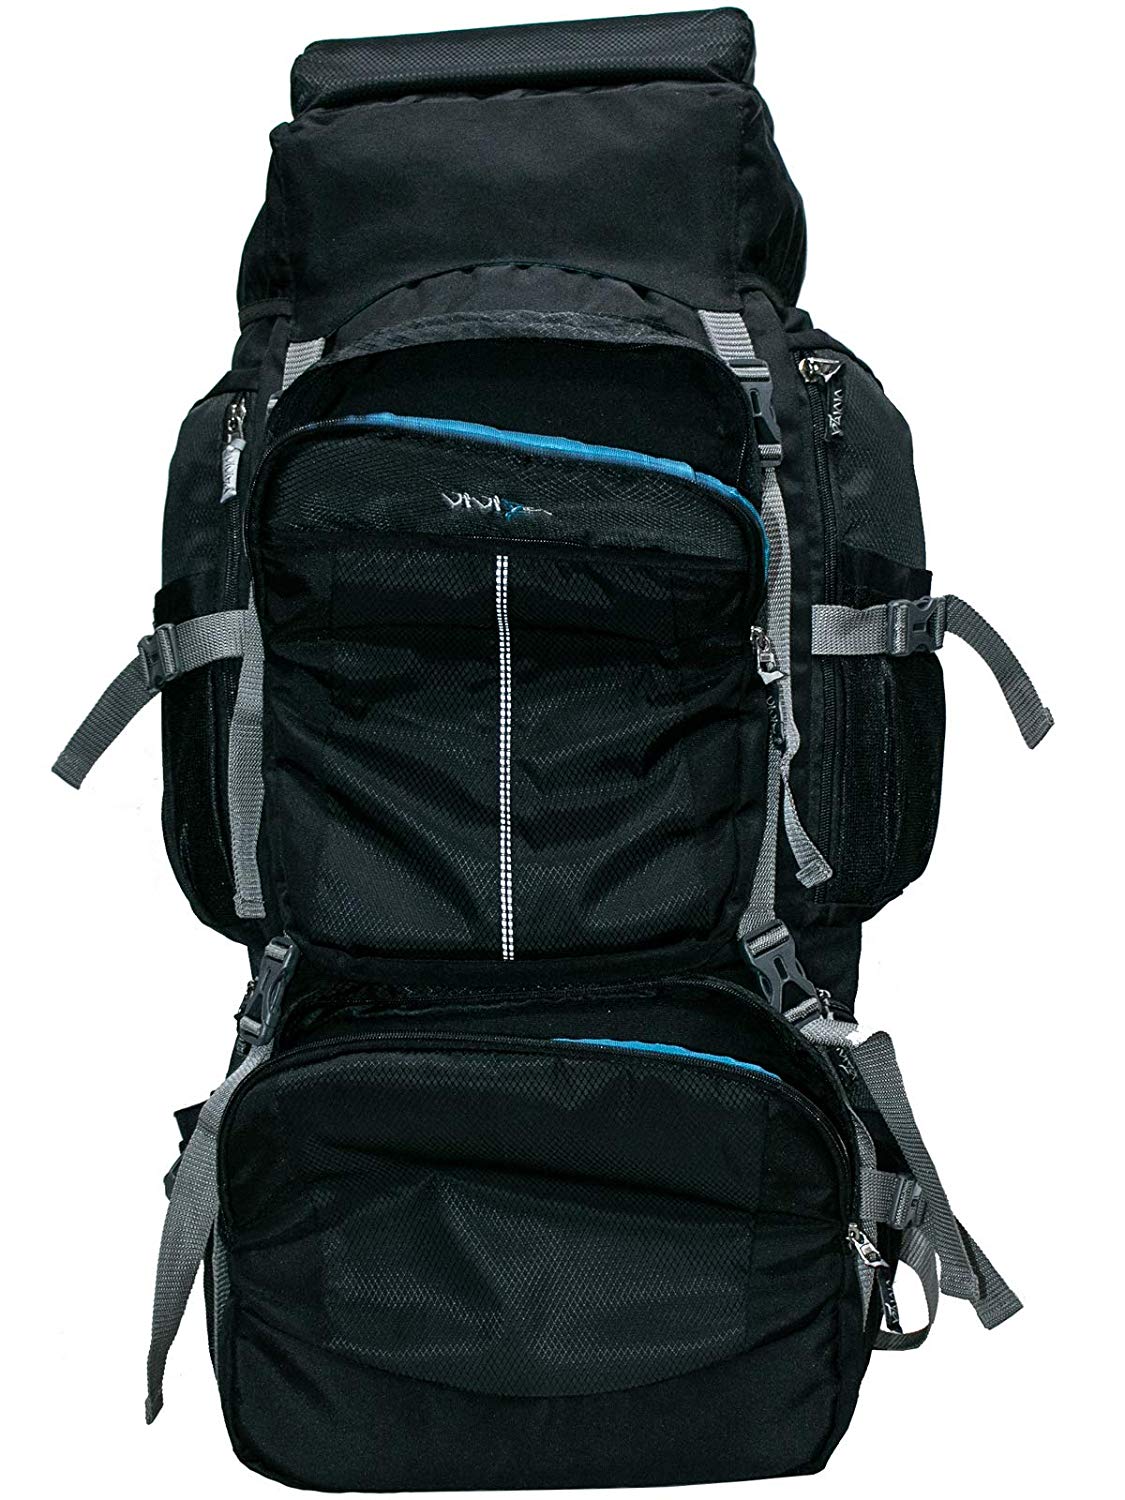 Backpack Trail running Hiking Trekking CAMP, backpack, blue, luggage Bags  png | PNGEgg